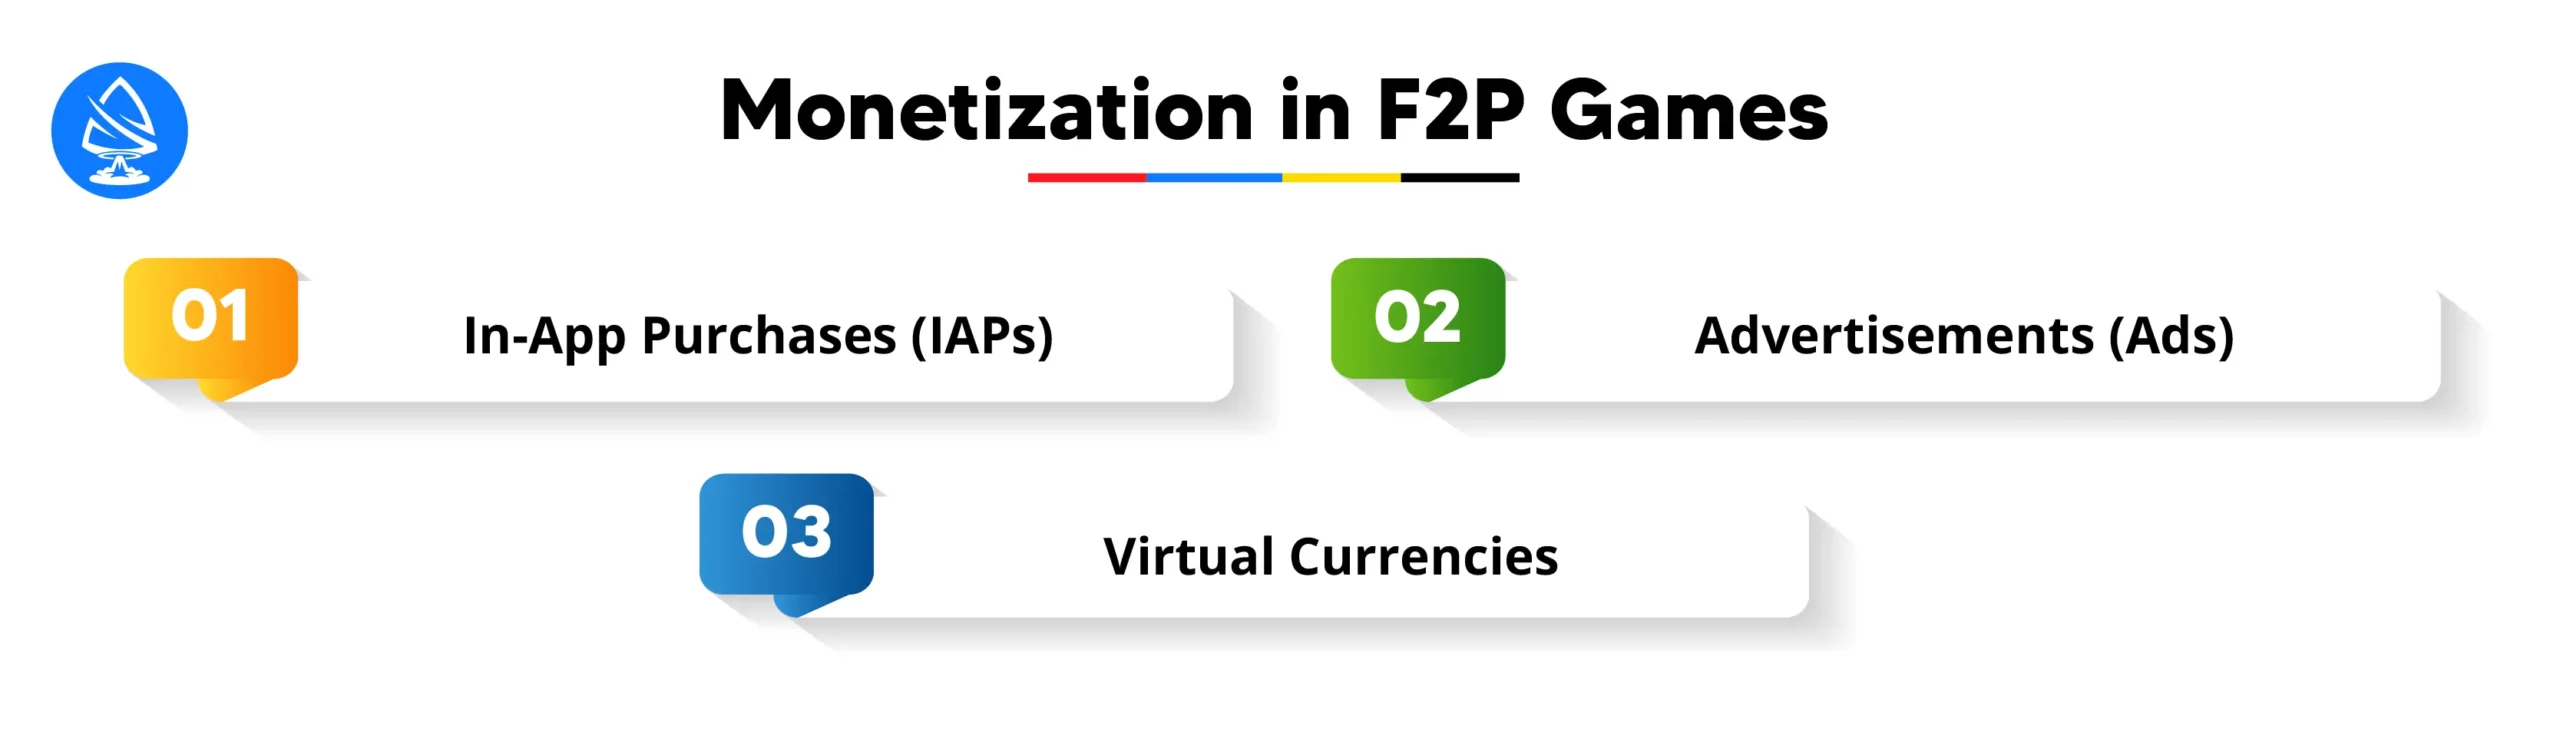 Monetization in F2P Games